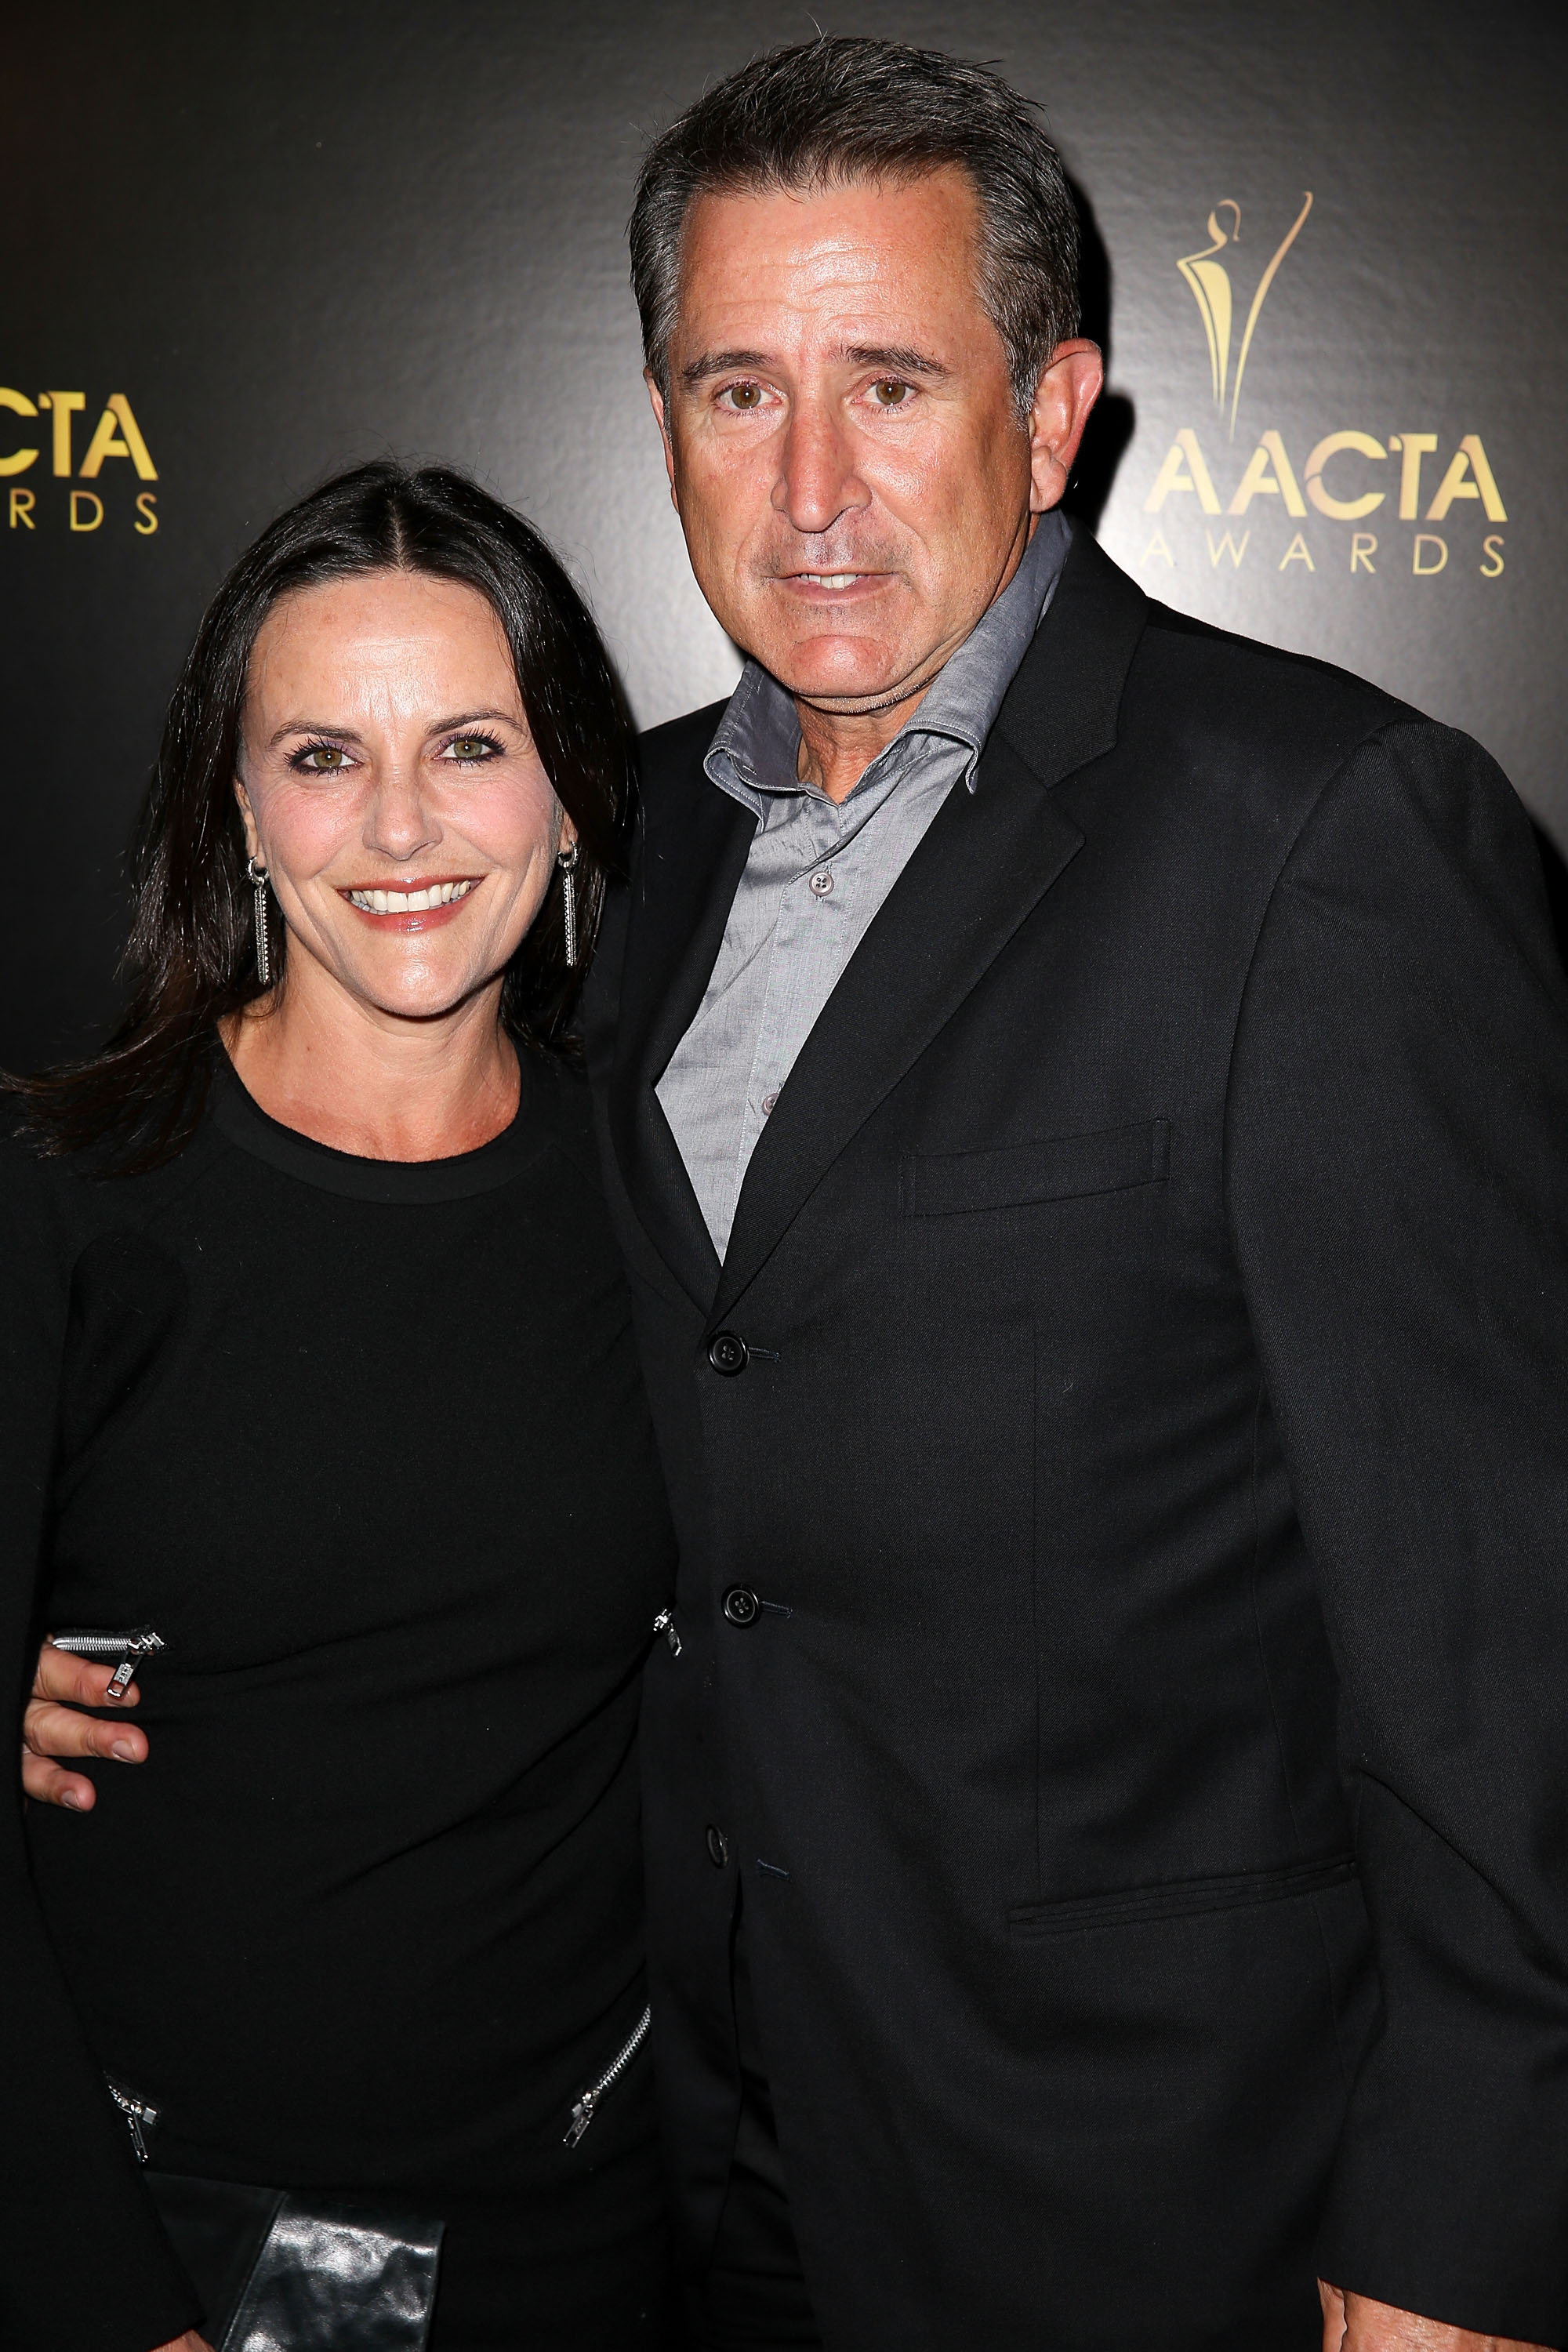 Anthony LaPaglia and actress Gia Carides pose at the 3rd Annual Australian Academy International Awards (AACTA) at Sunset Marquis Hotel & Villas on January 10, 2014, in West Hollywood, California | Source: Getty Images